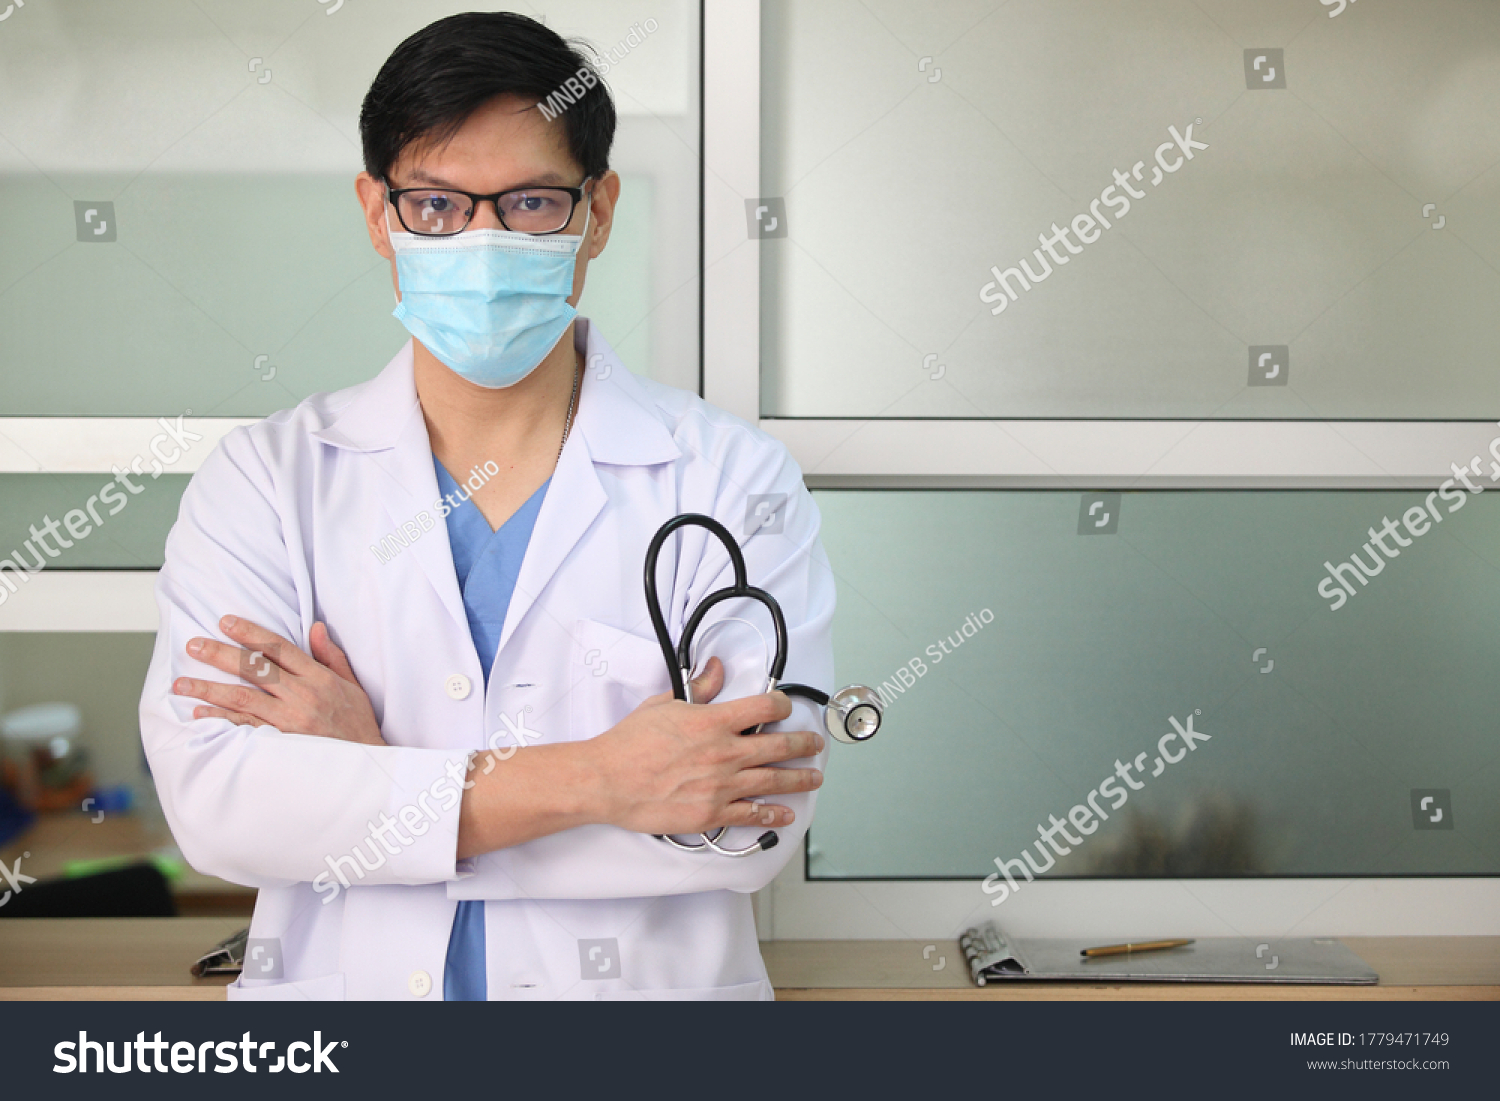 Coronavirus mask doctor wearing face protective mask against corona virus banner panoramic medical professional preventive gear.
and he hold stethoscope with hospital background #1779471749